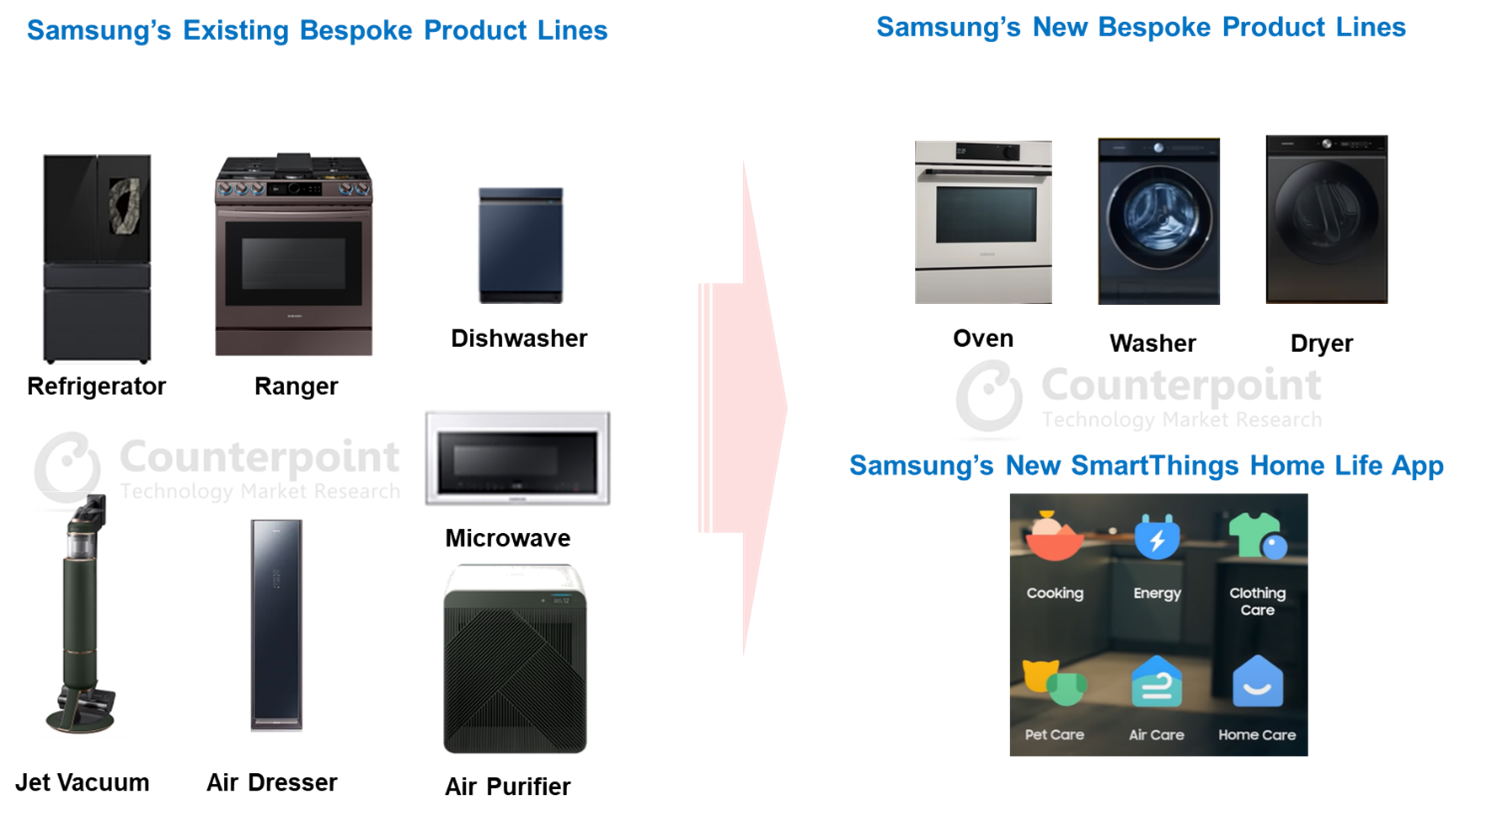 Samsung's New Bespoke Products Line